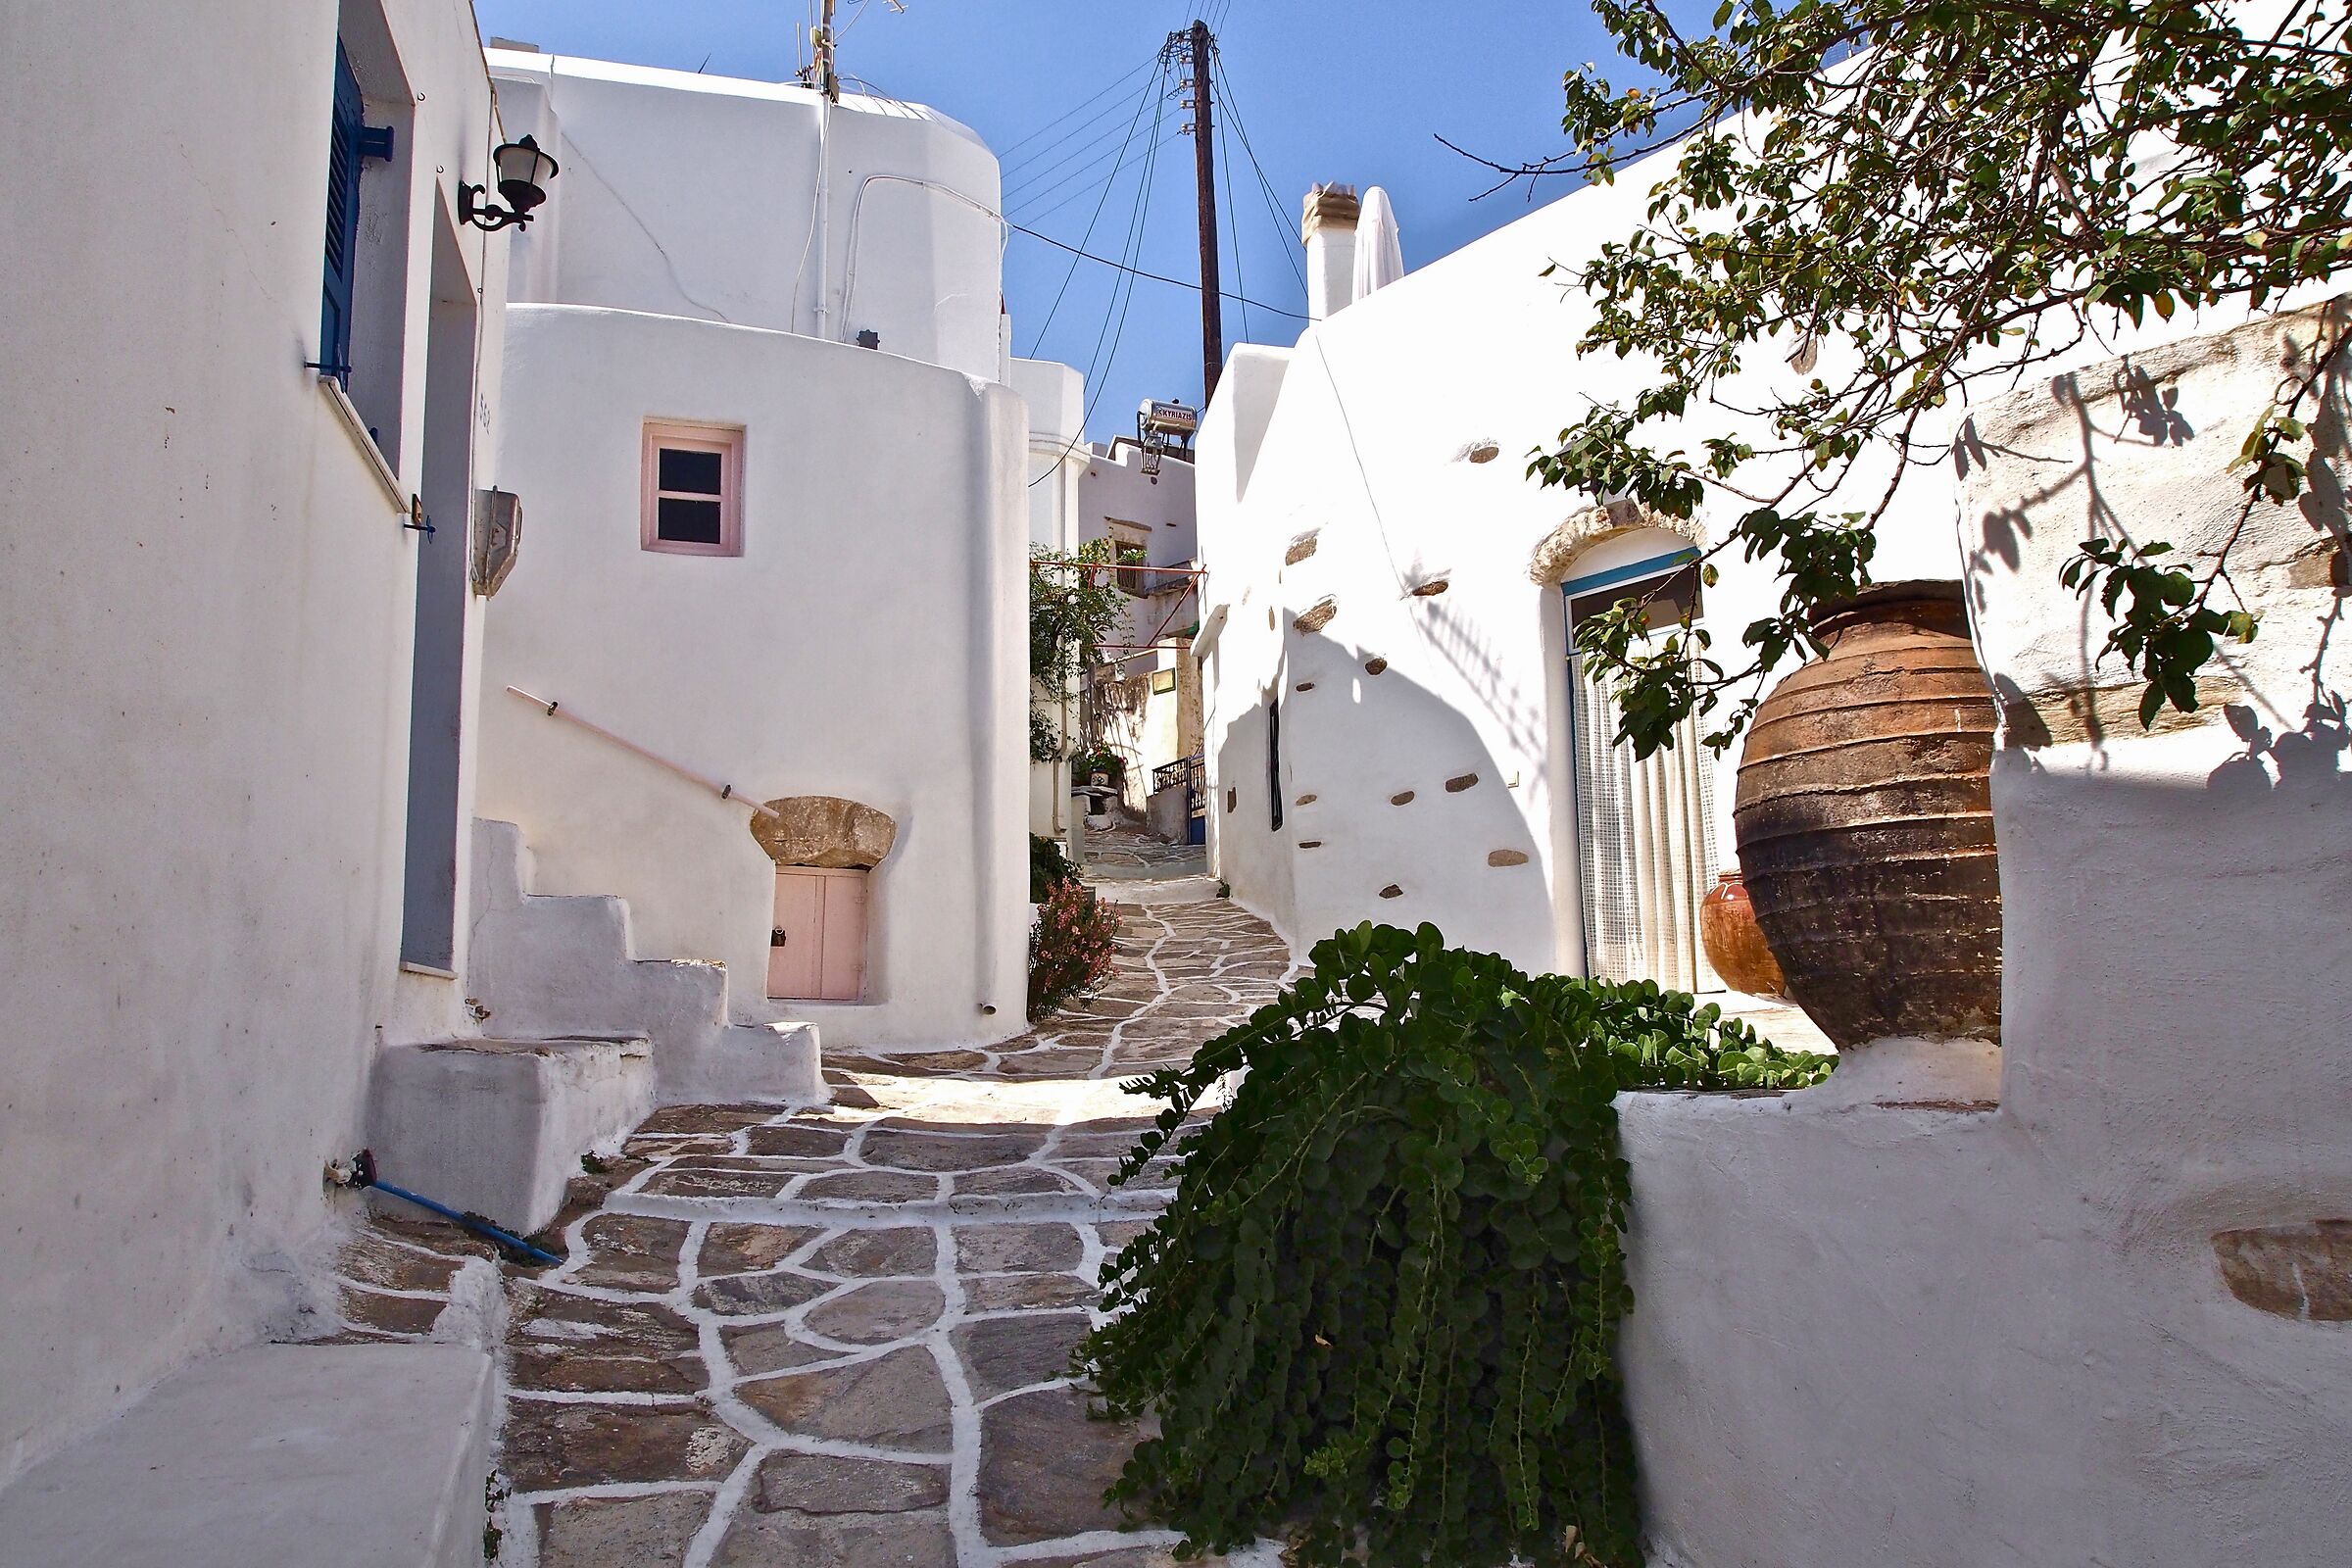 Cyclades Islands - the alleys of Left...